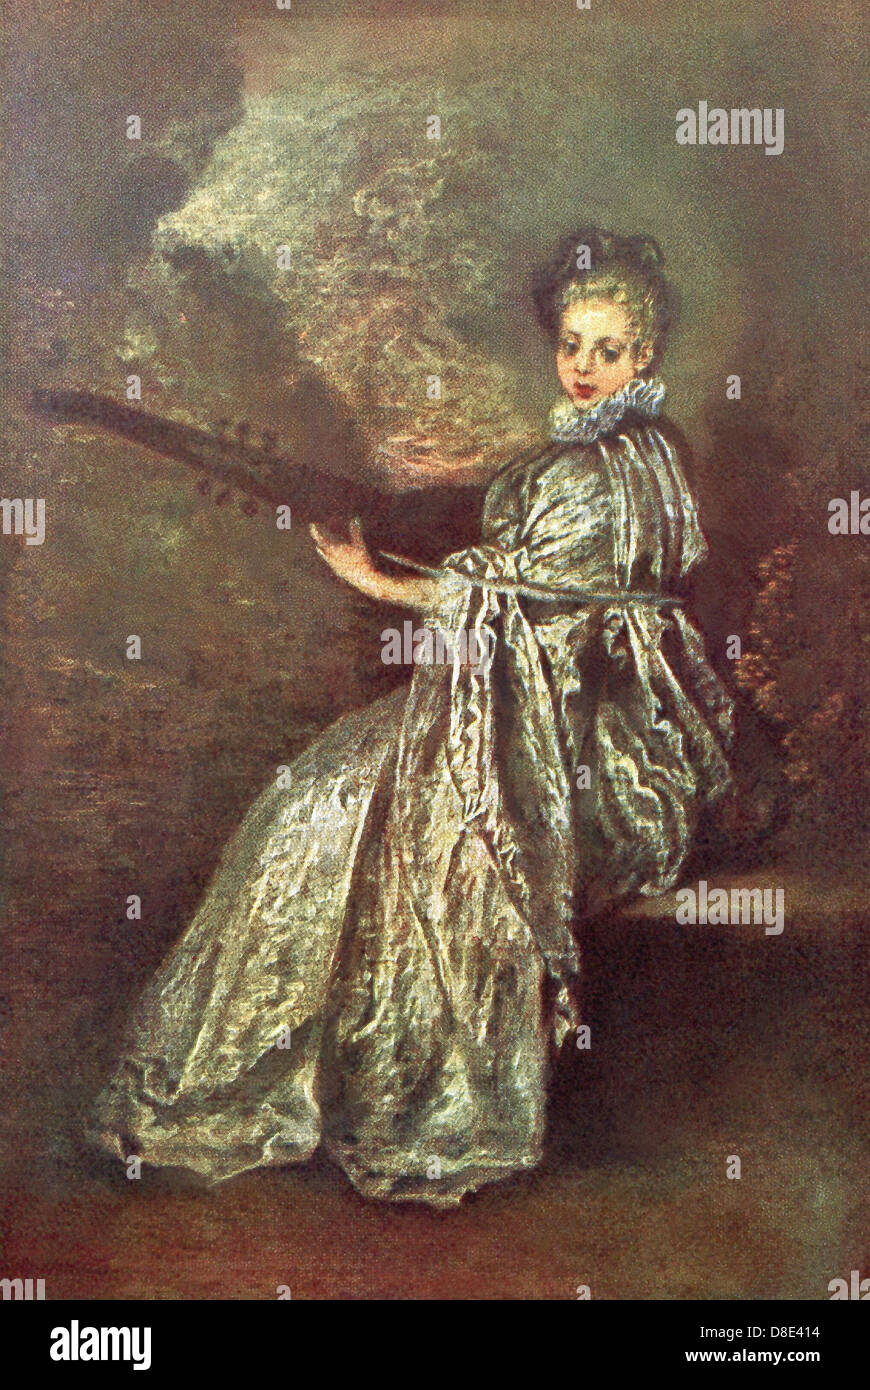 This painting, titled La Finette, was done by French artist Jean-Antoine Watteau around 1717. Stock Photo